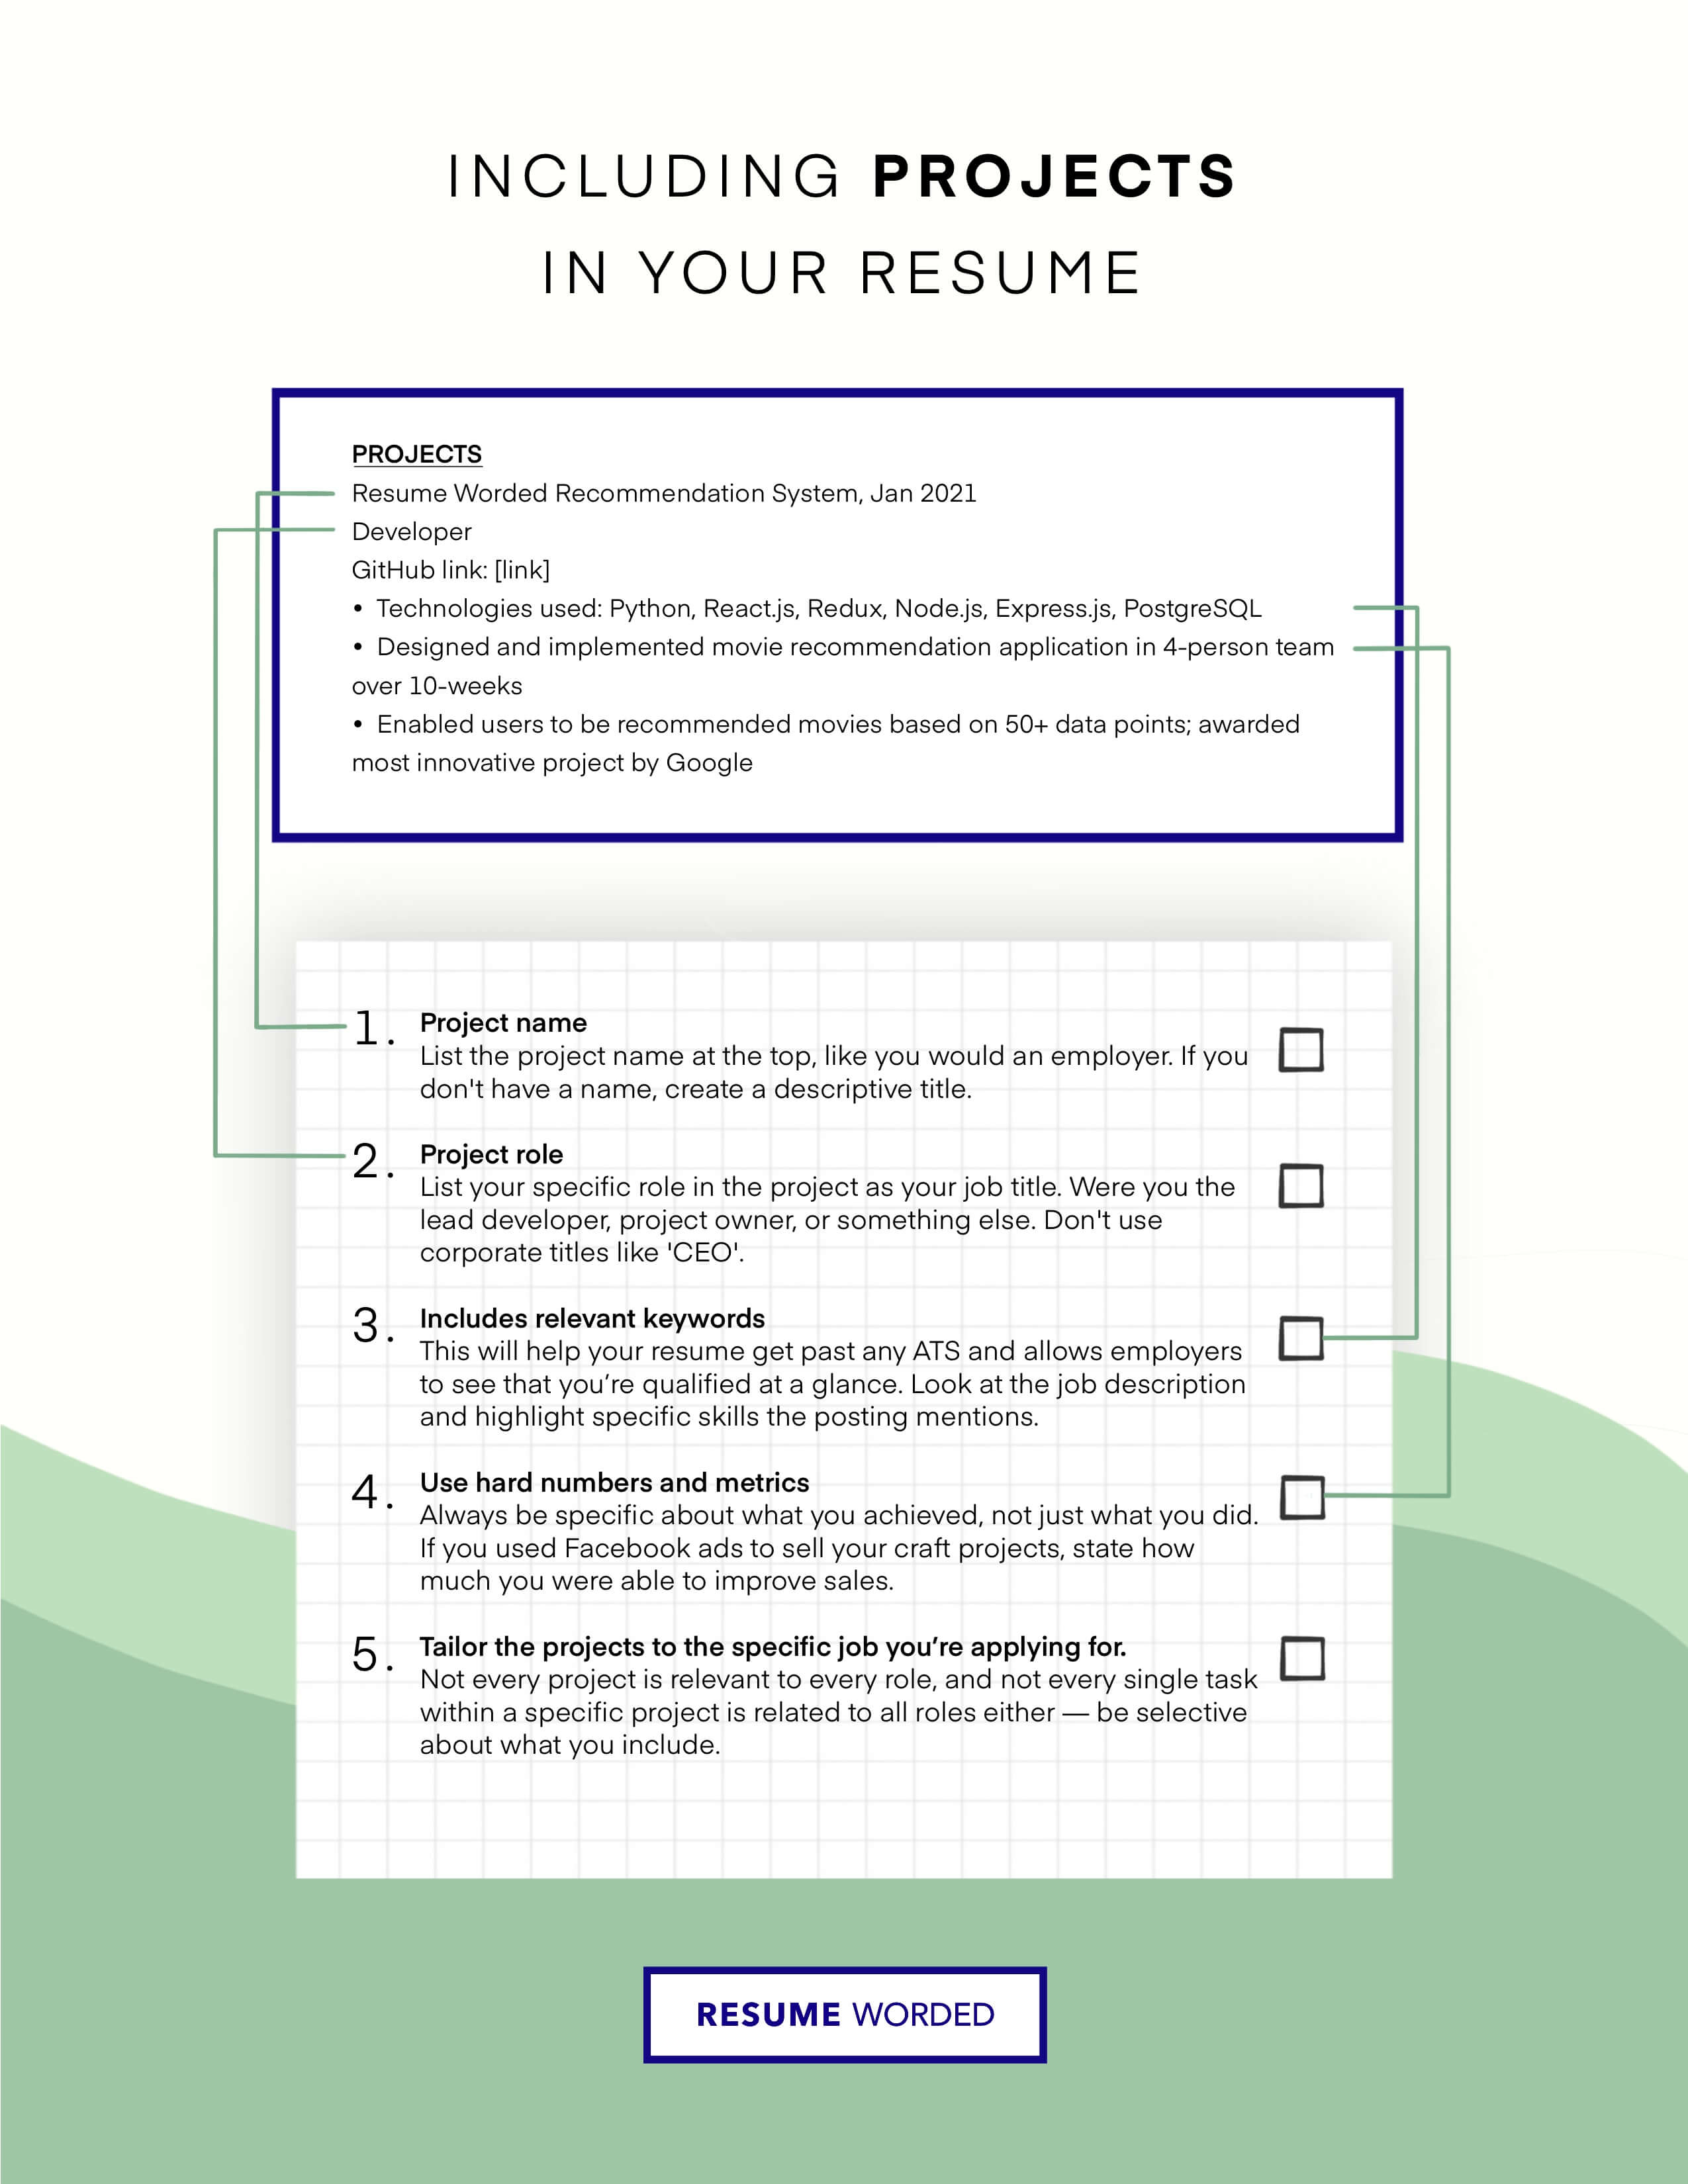 how to write about your project in resume